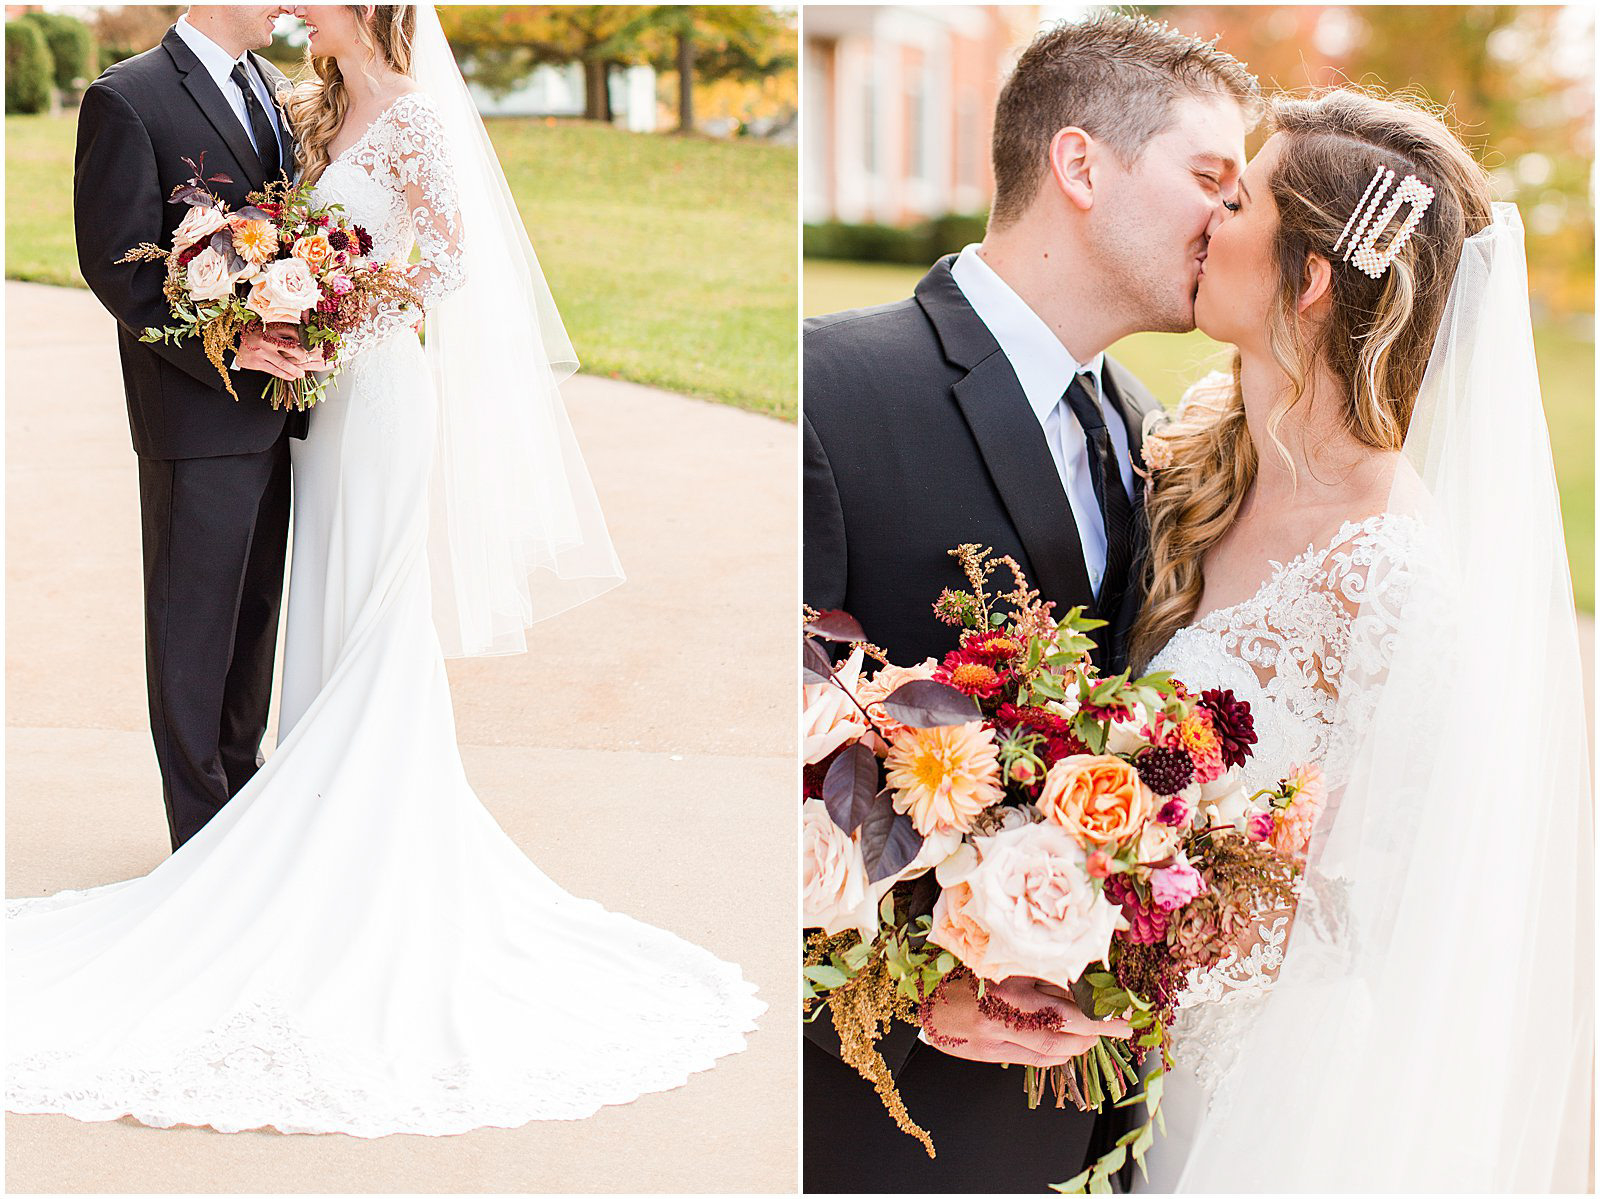 A Romantic Fall Wedding in Ferdinand, IN | Tori and Kyle | Bret and Brandie Photography 0112.jpg